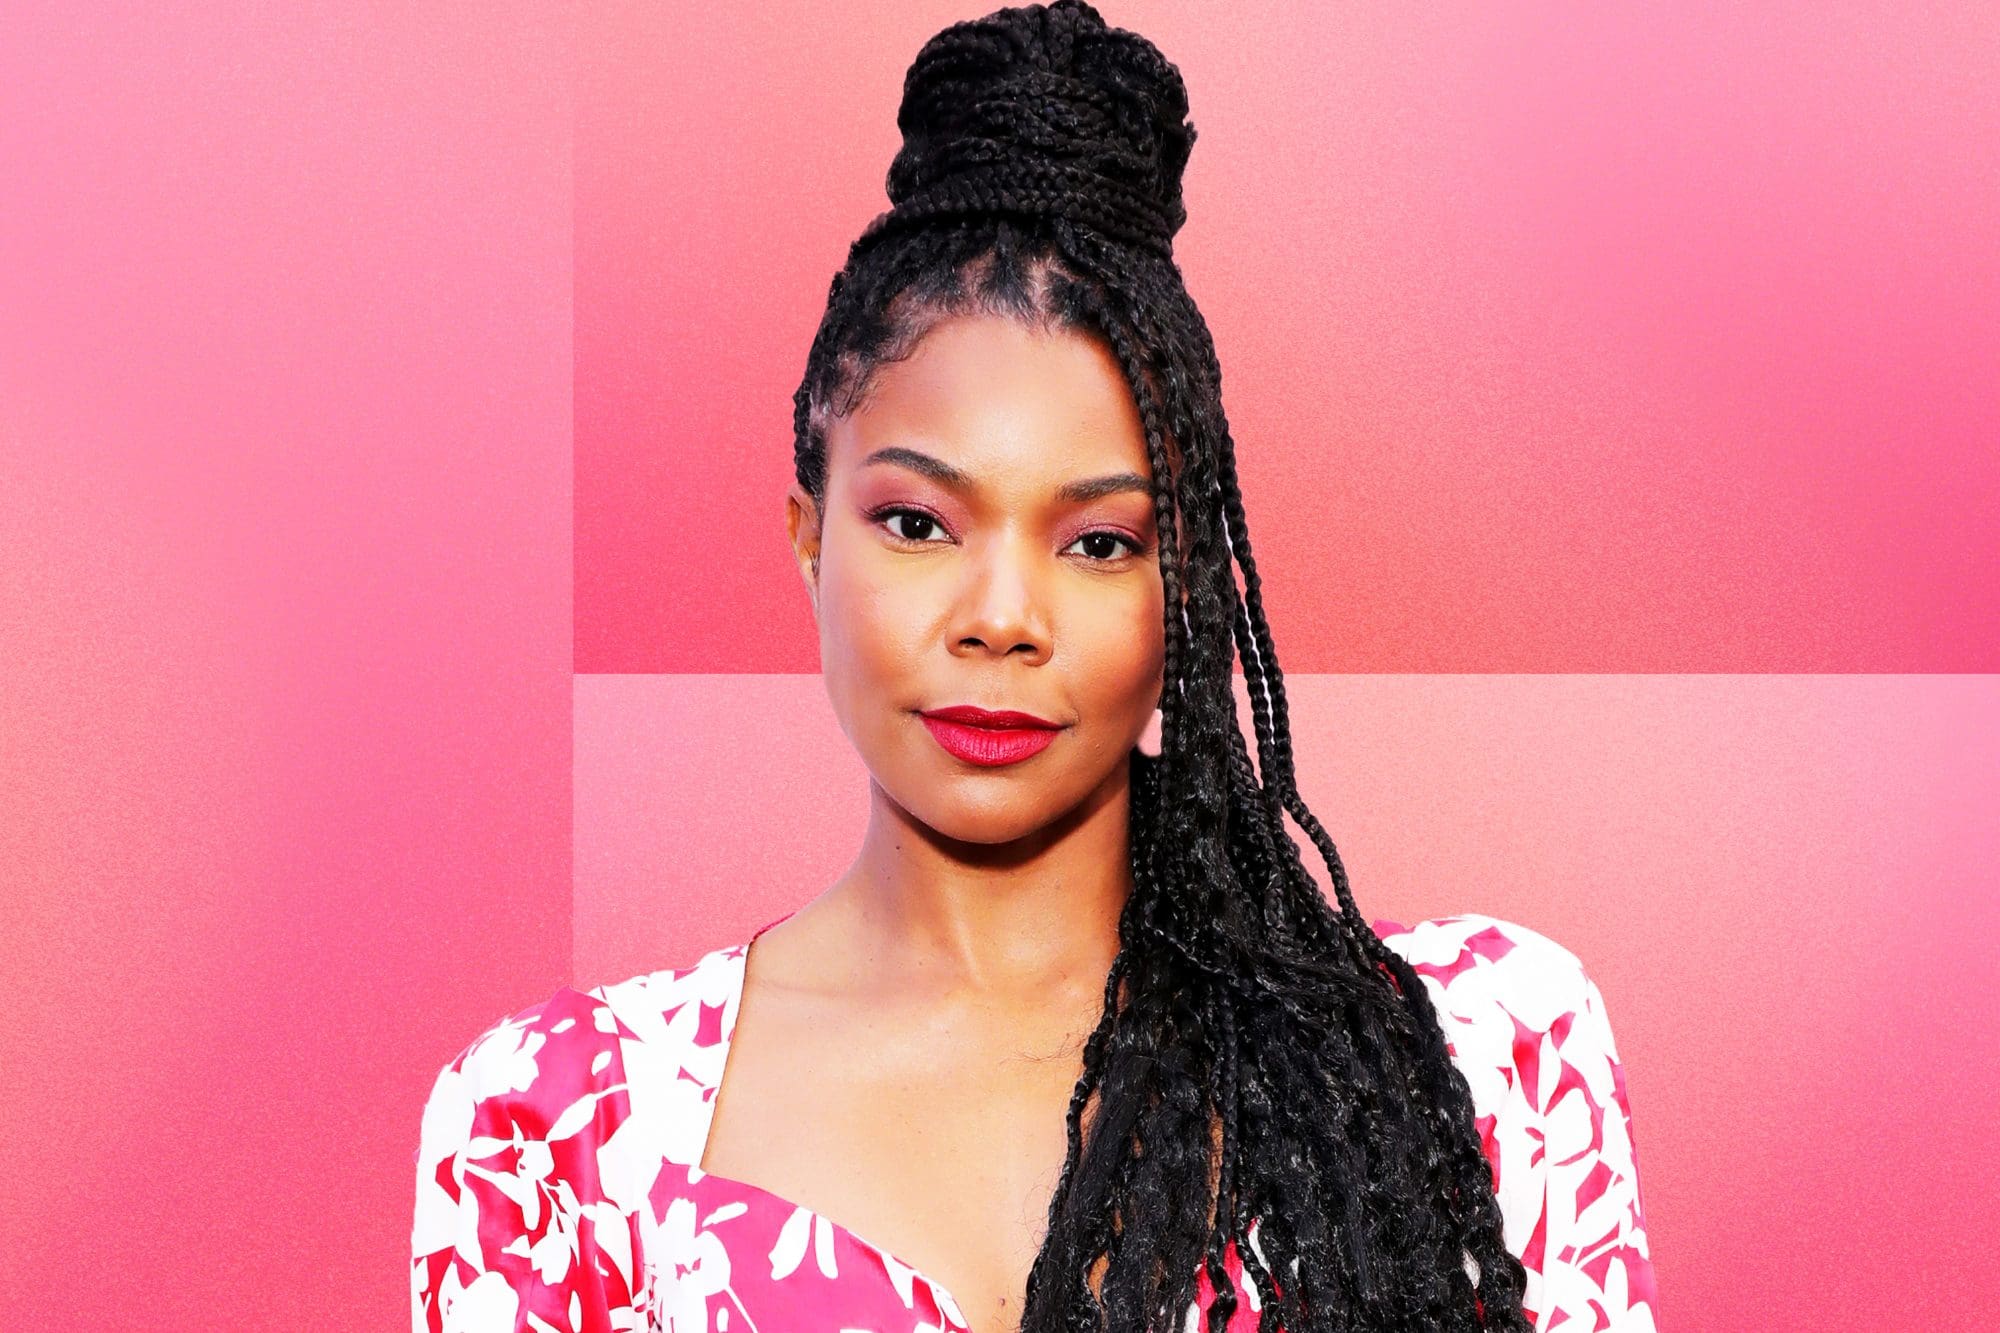 gabrielle-union-praised-a-special-makeup-artist-see-her-clip-and-message